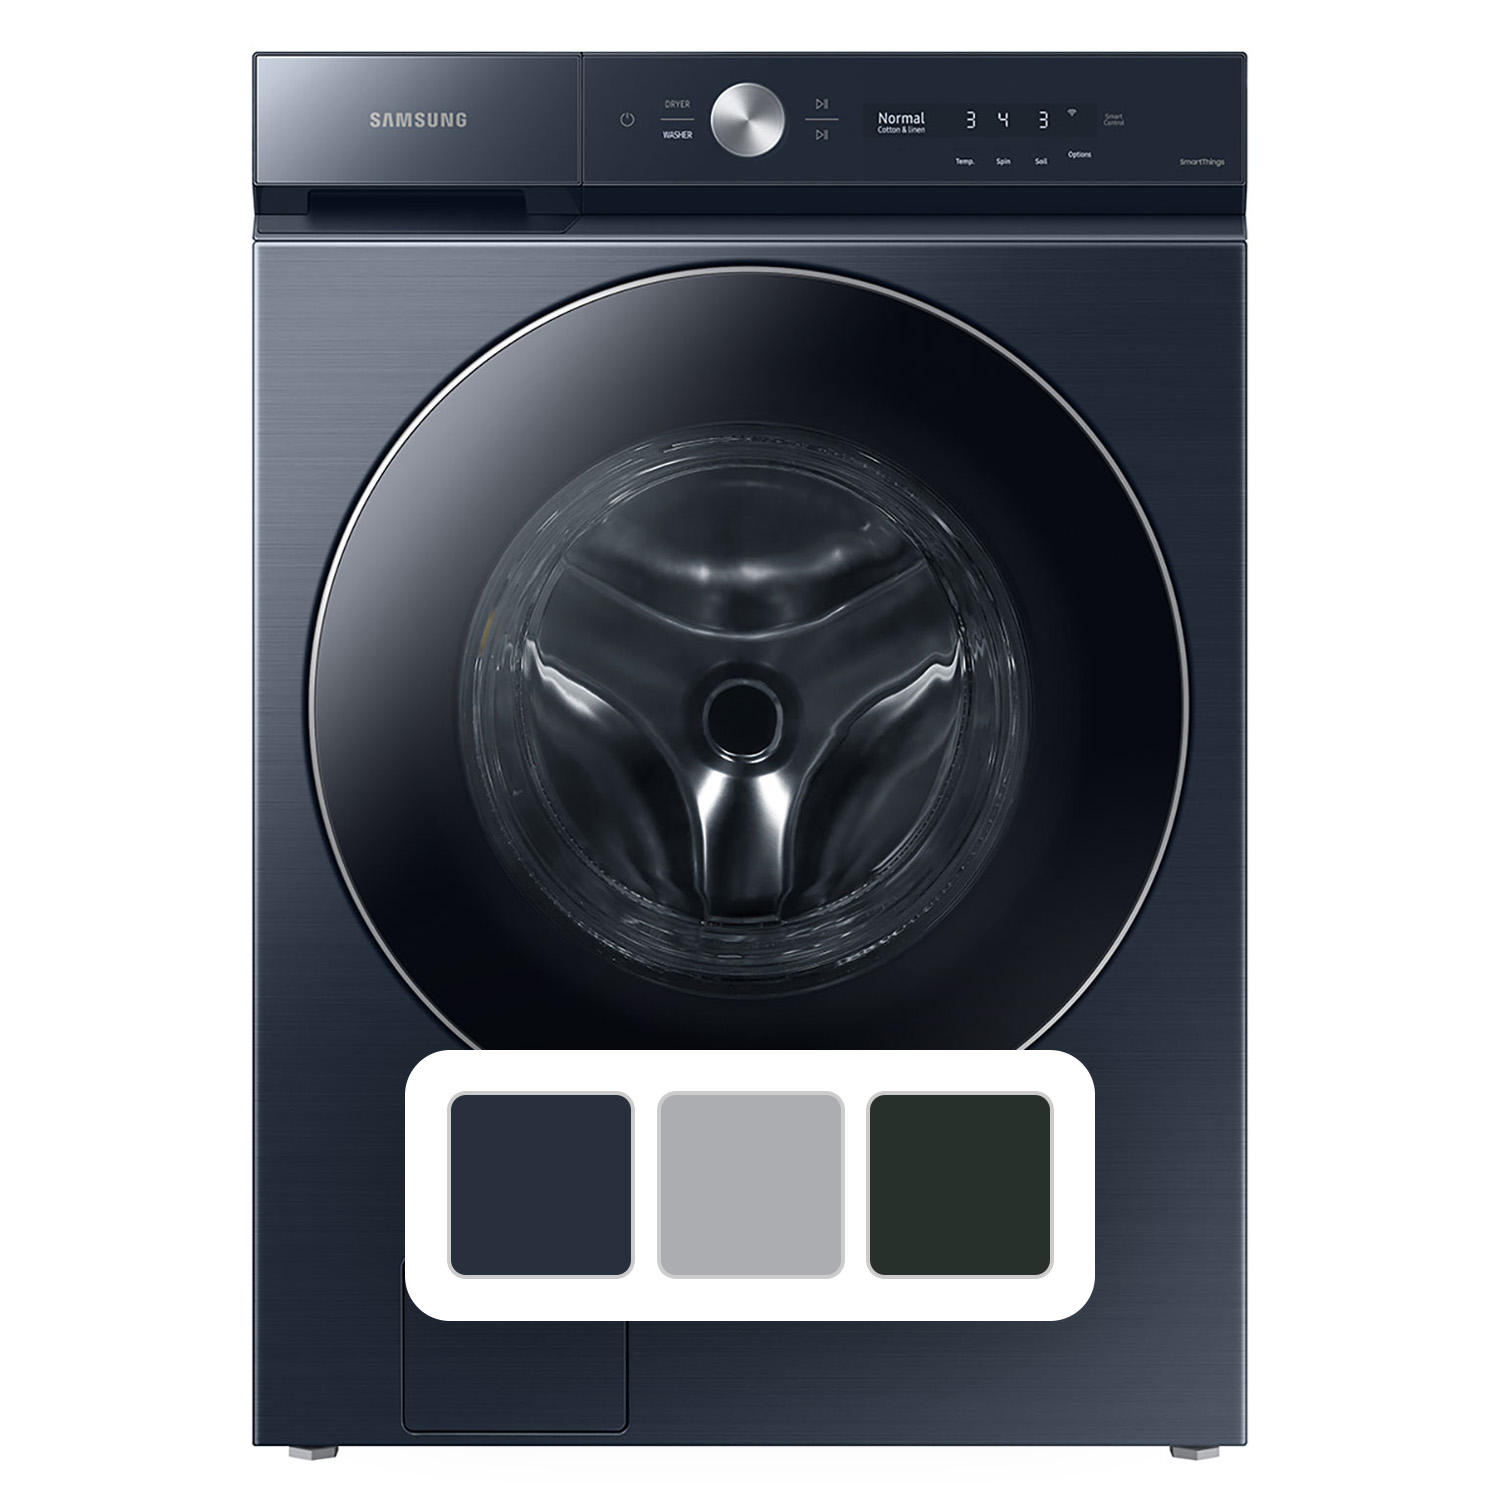 BSamsung Bespoke 5.3 Cu. Ft. Front Load Washer w/ AI OptiWash & Auto Dispense (Navy Blue)